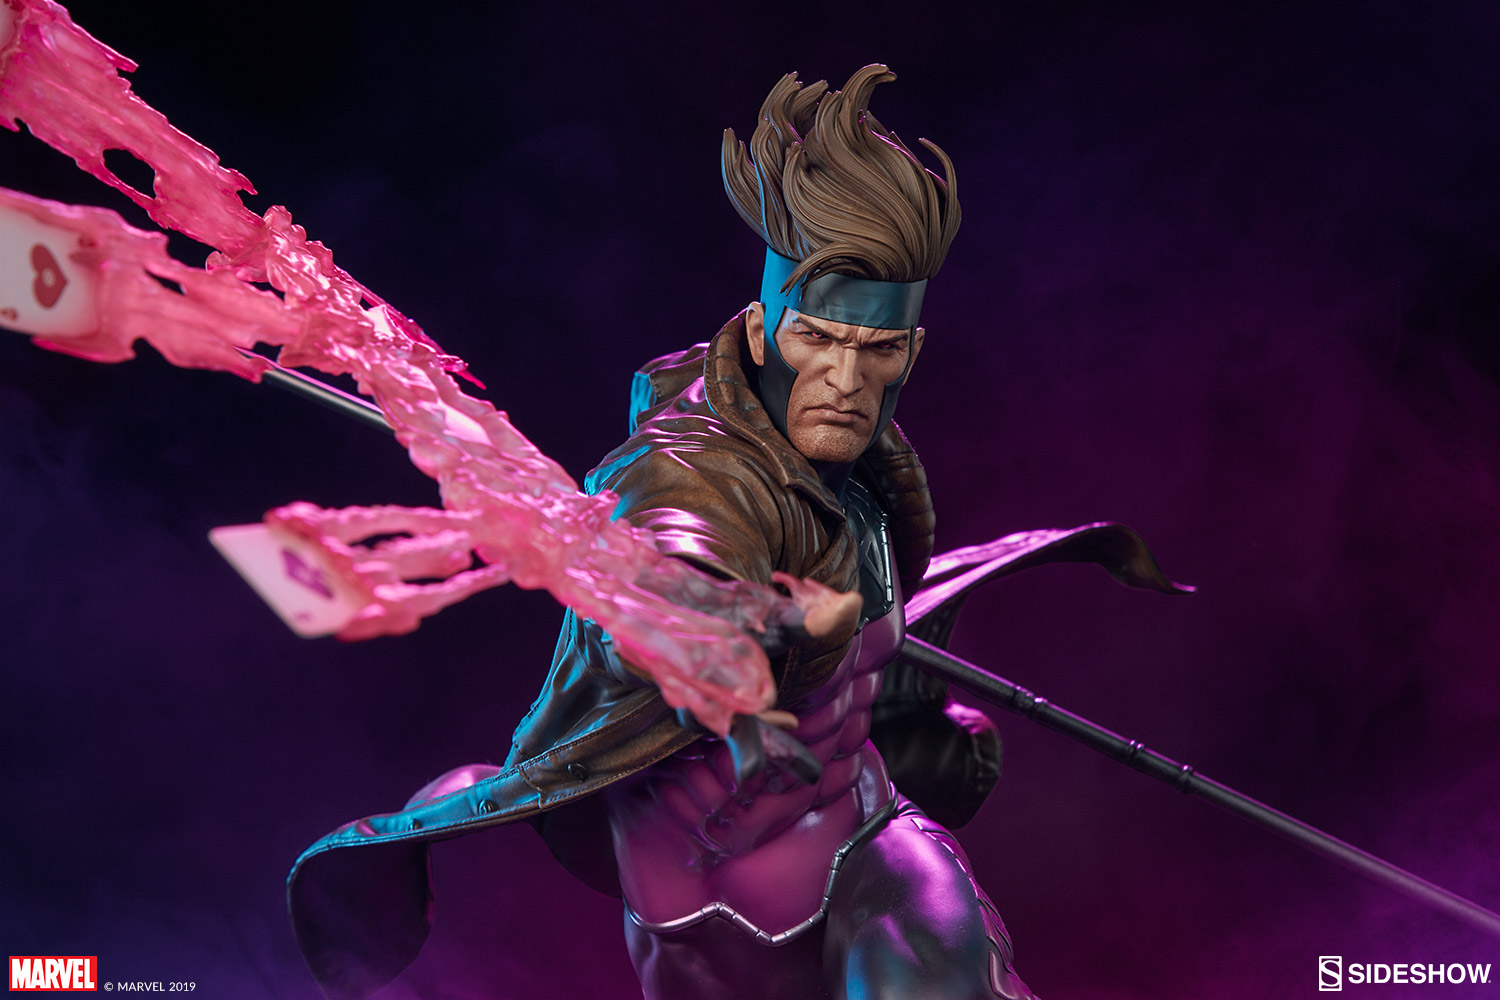 https://www.sideshow.com/storage/product-images/300727/gambit_marvel_gallery_5d66e7f160561.jpg